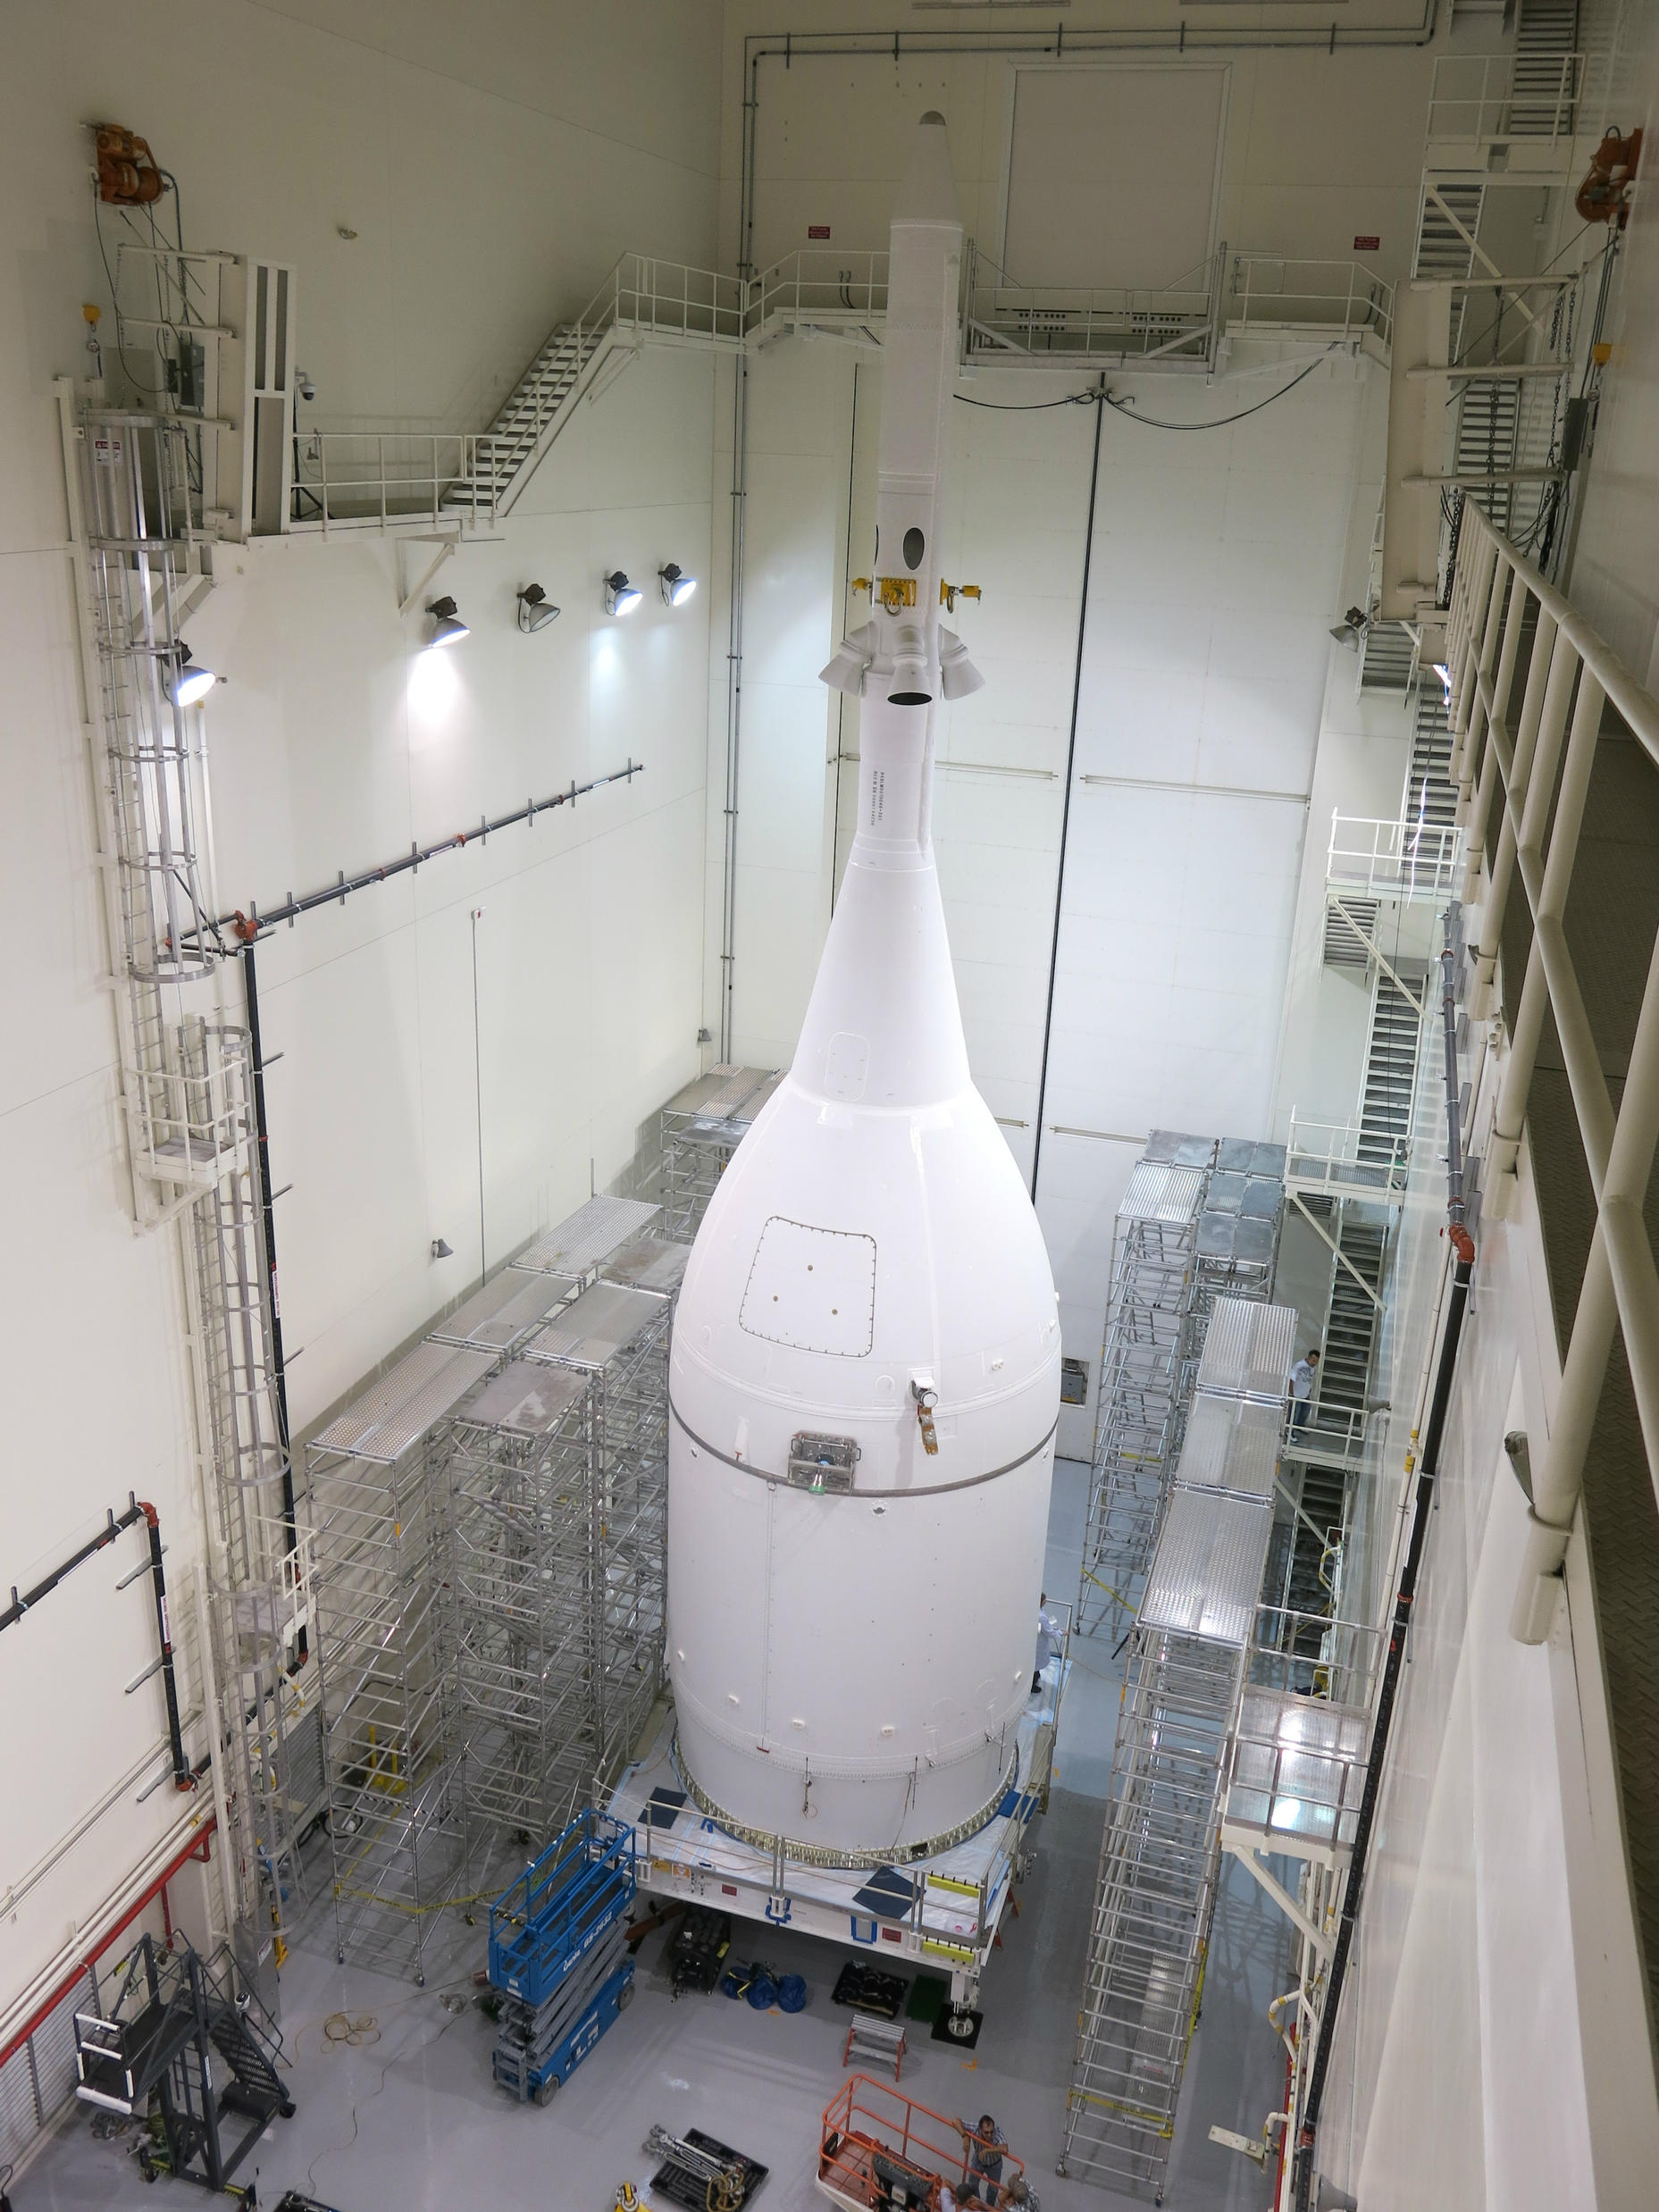 NASA's Orion spacecraft was completed Thursday, Oct. 30, 2014 in the Launch Abort System Facility at NASA's Kennedy Space Center in Florida. It will reside there until Nov. 10, when it will be rolled out to Launch Complex 37 at Cape Canaveral Air Force Station ahead of its Dec. 4 test flight.